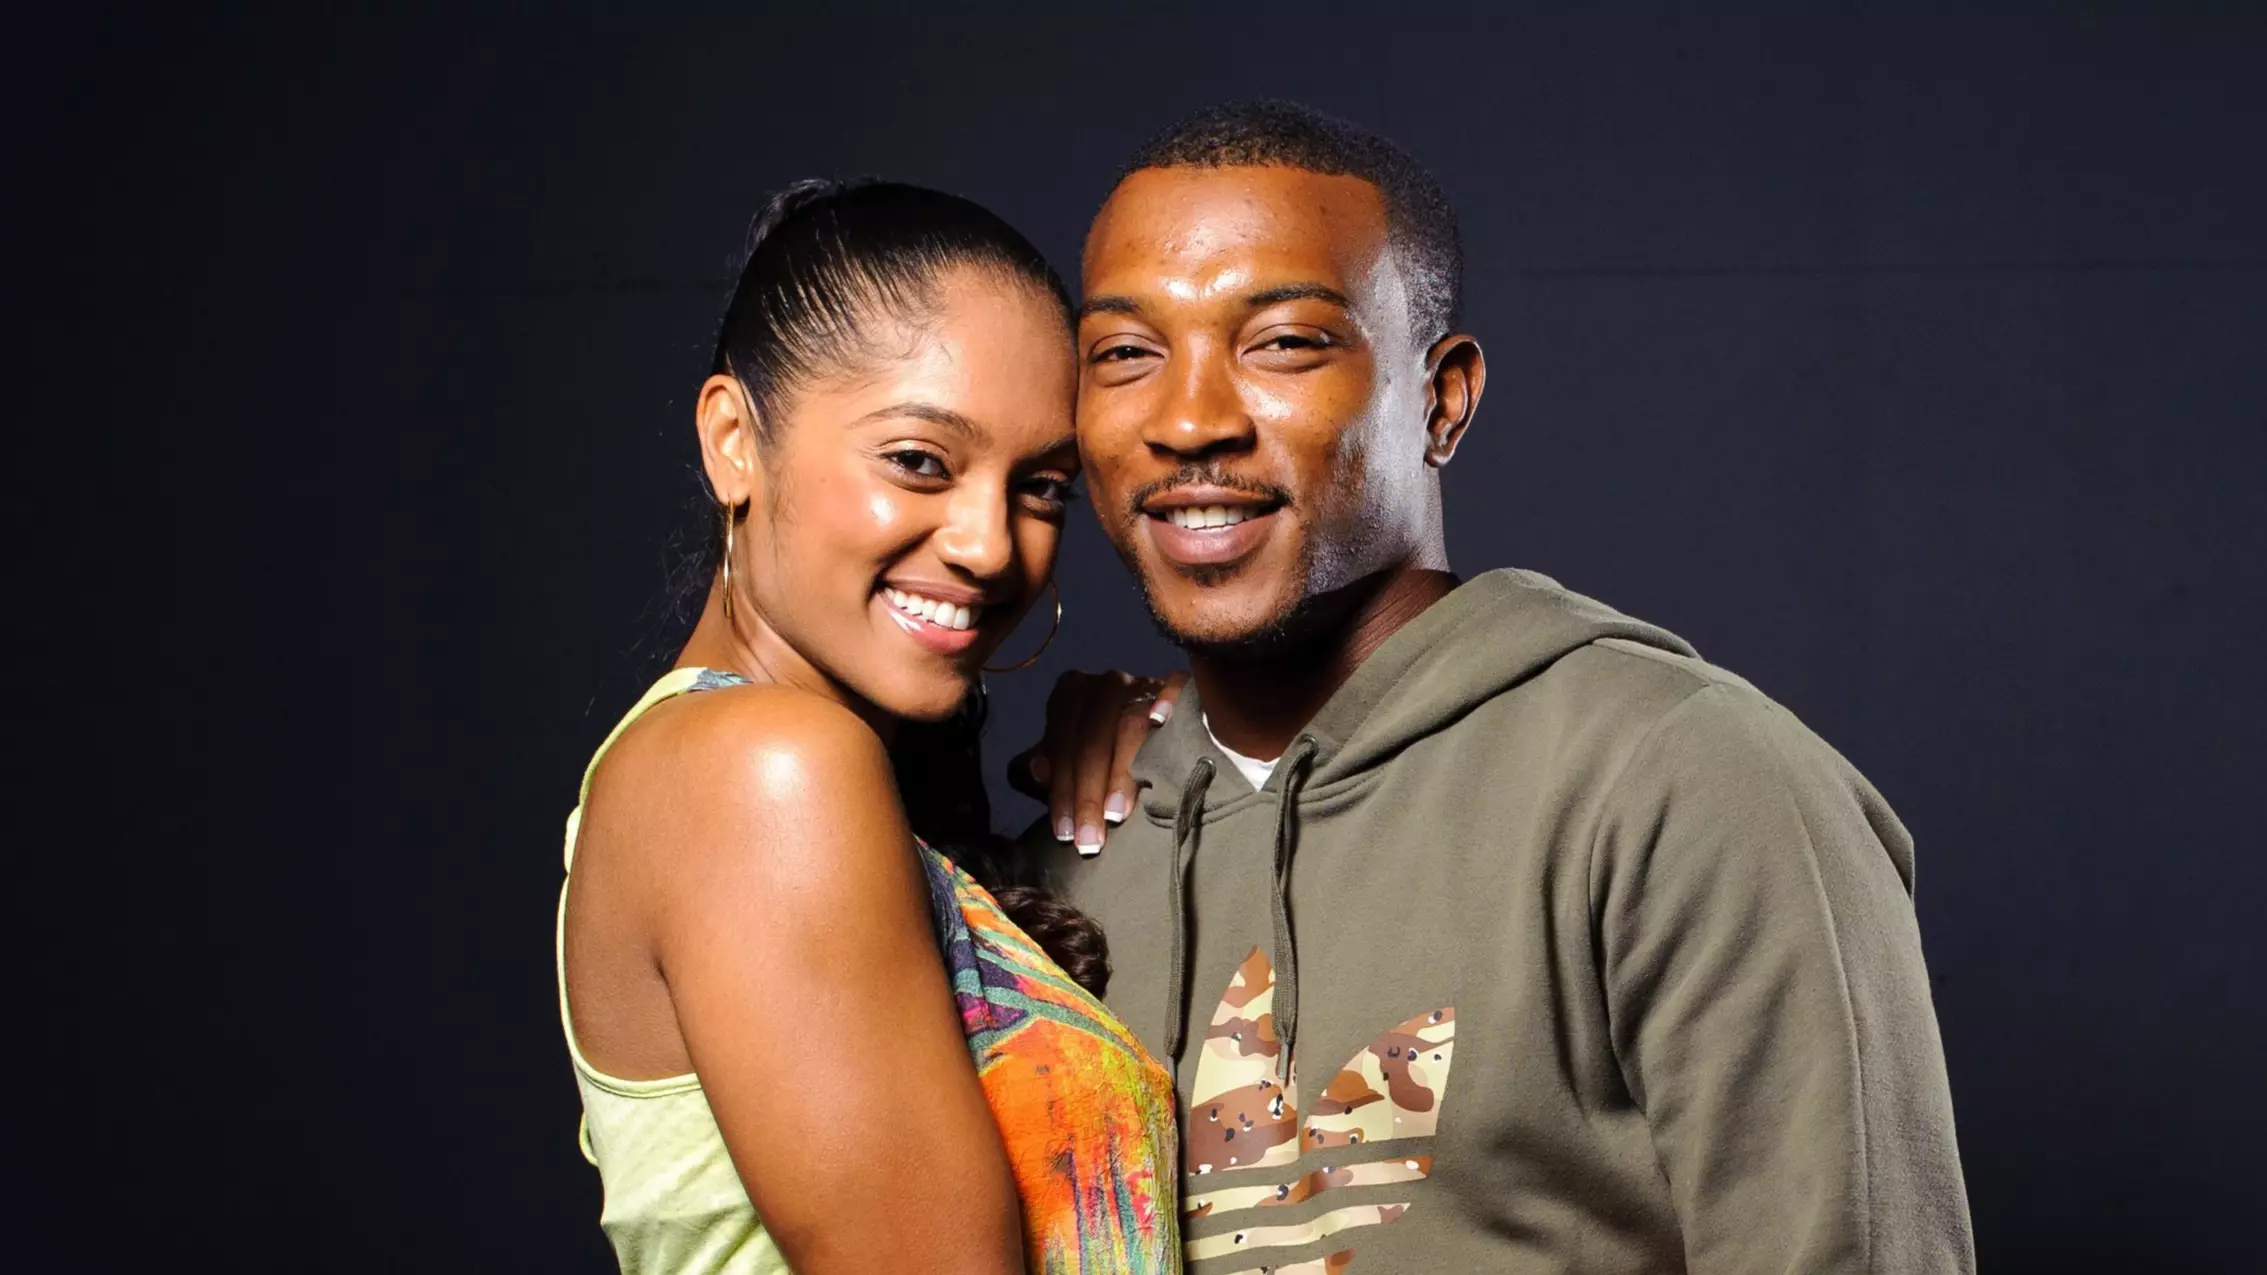 Top Boy 3 Cast: Who Is Ashley Walters AKA Asher D And Who Is His Wife?